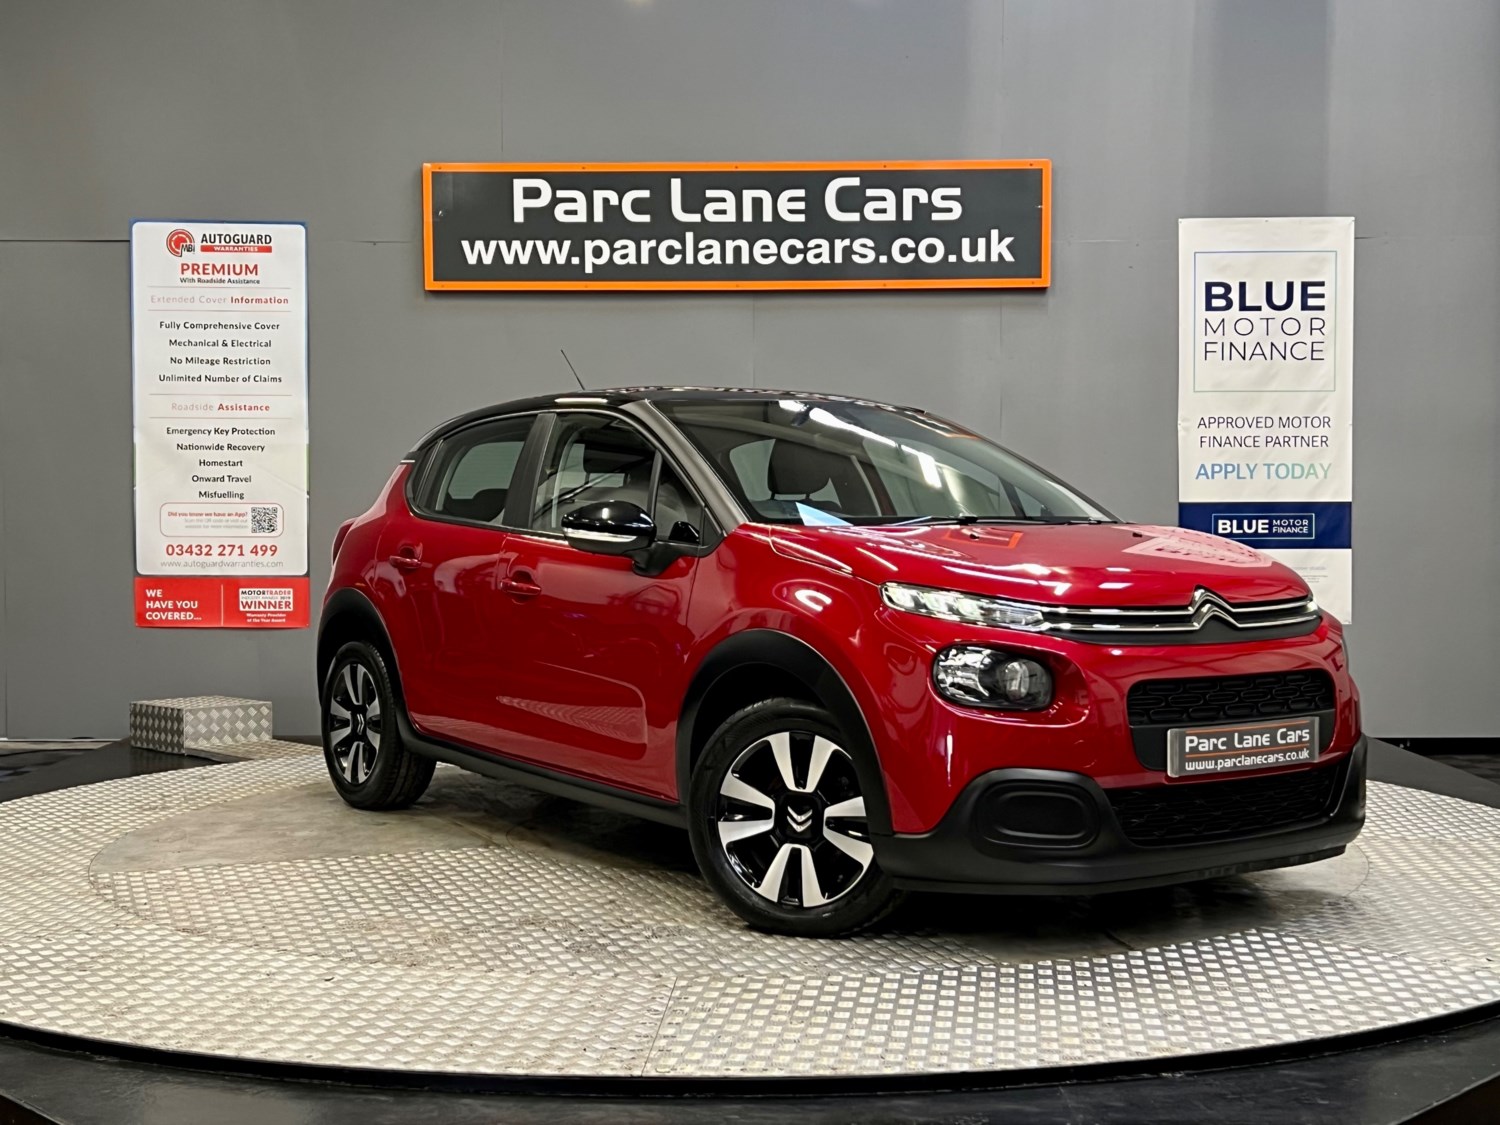 2020 used Citroen C3 1.2 PureTech 83 Feel 5dr ** 1 OWNER FROM NEW **